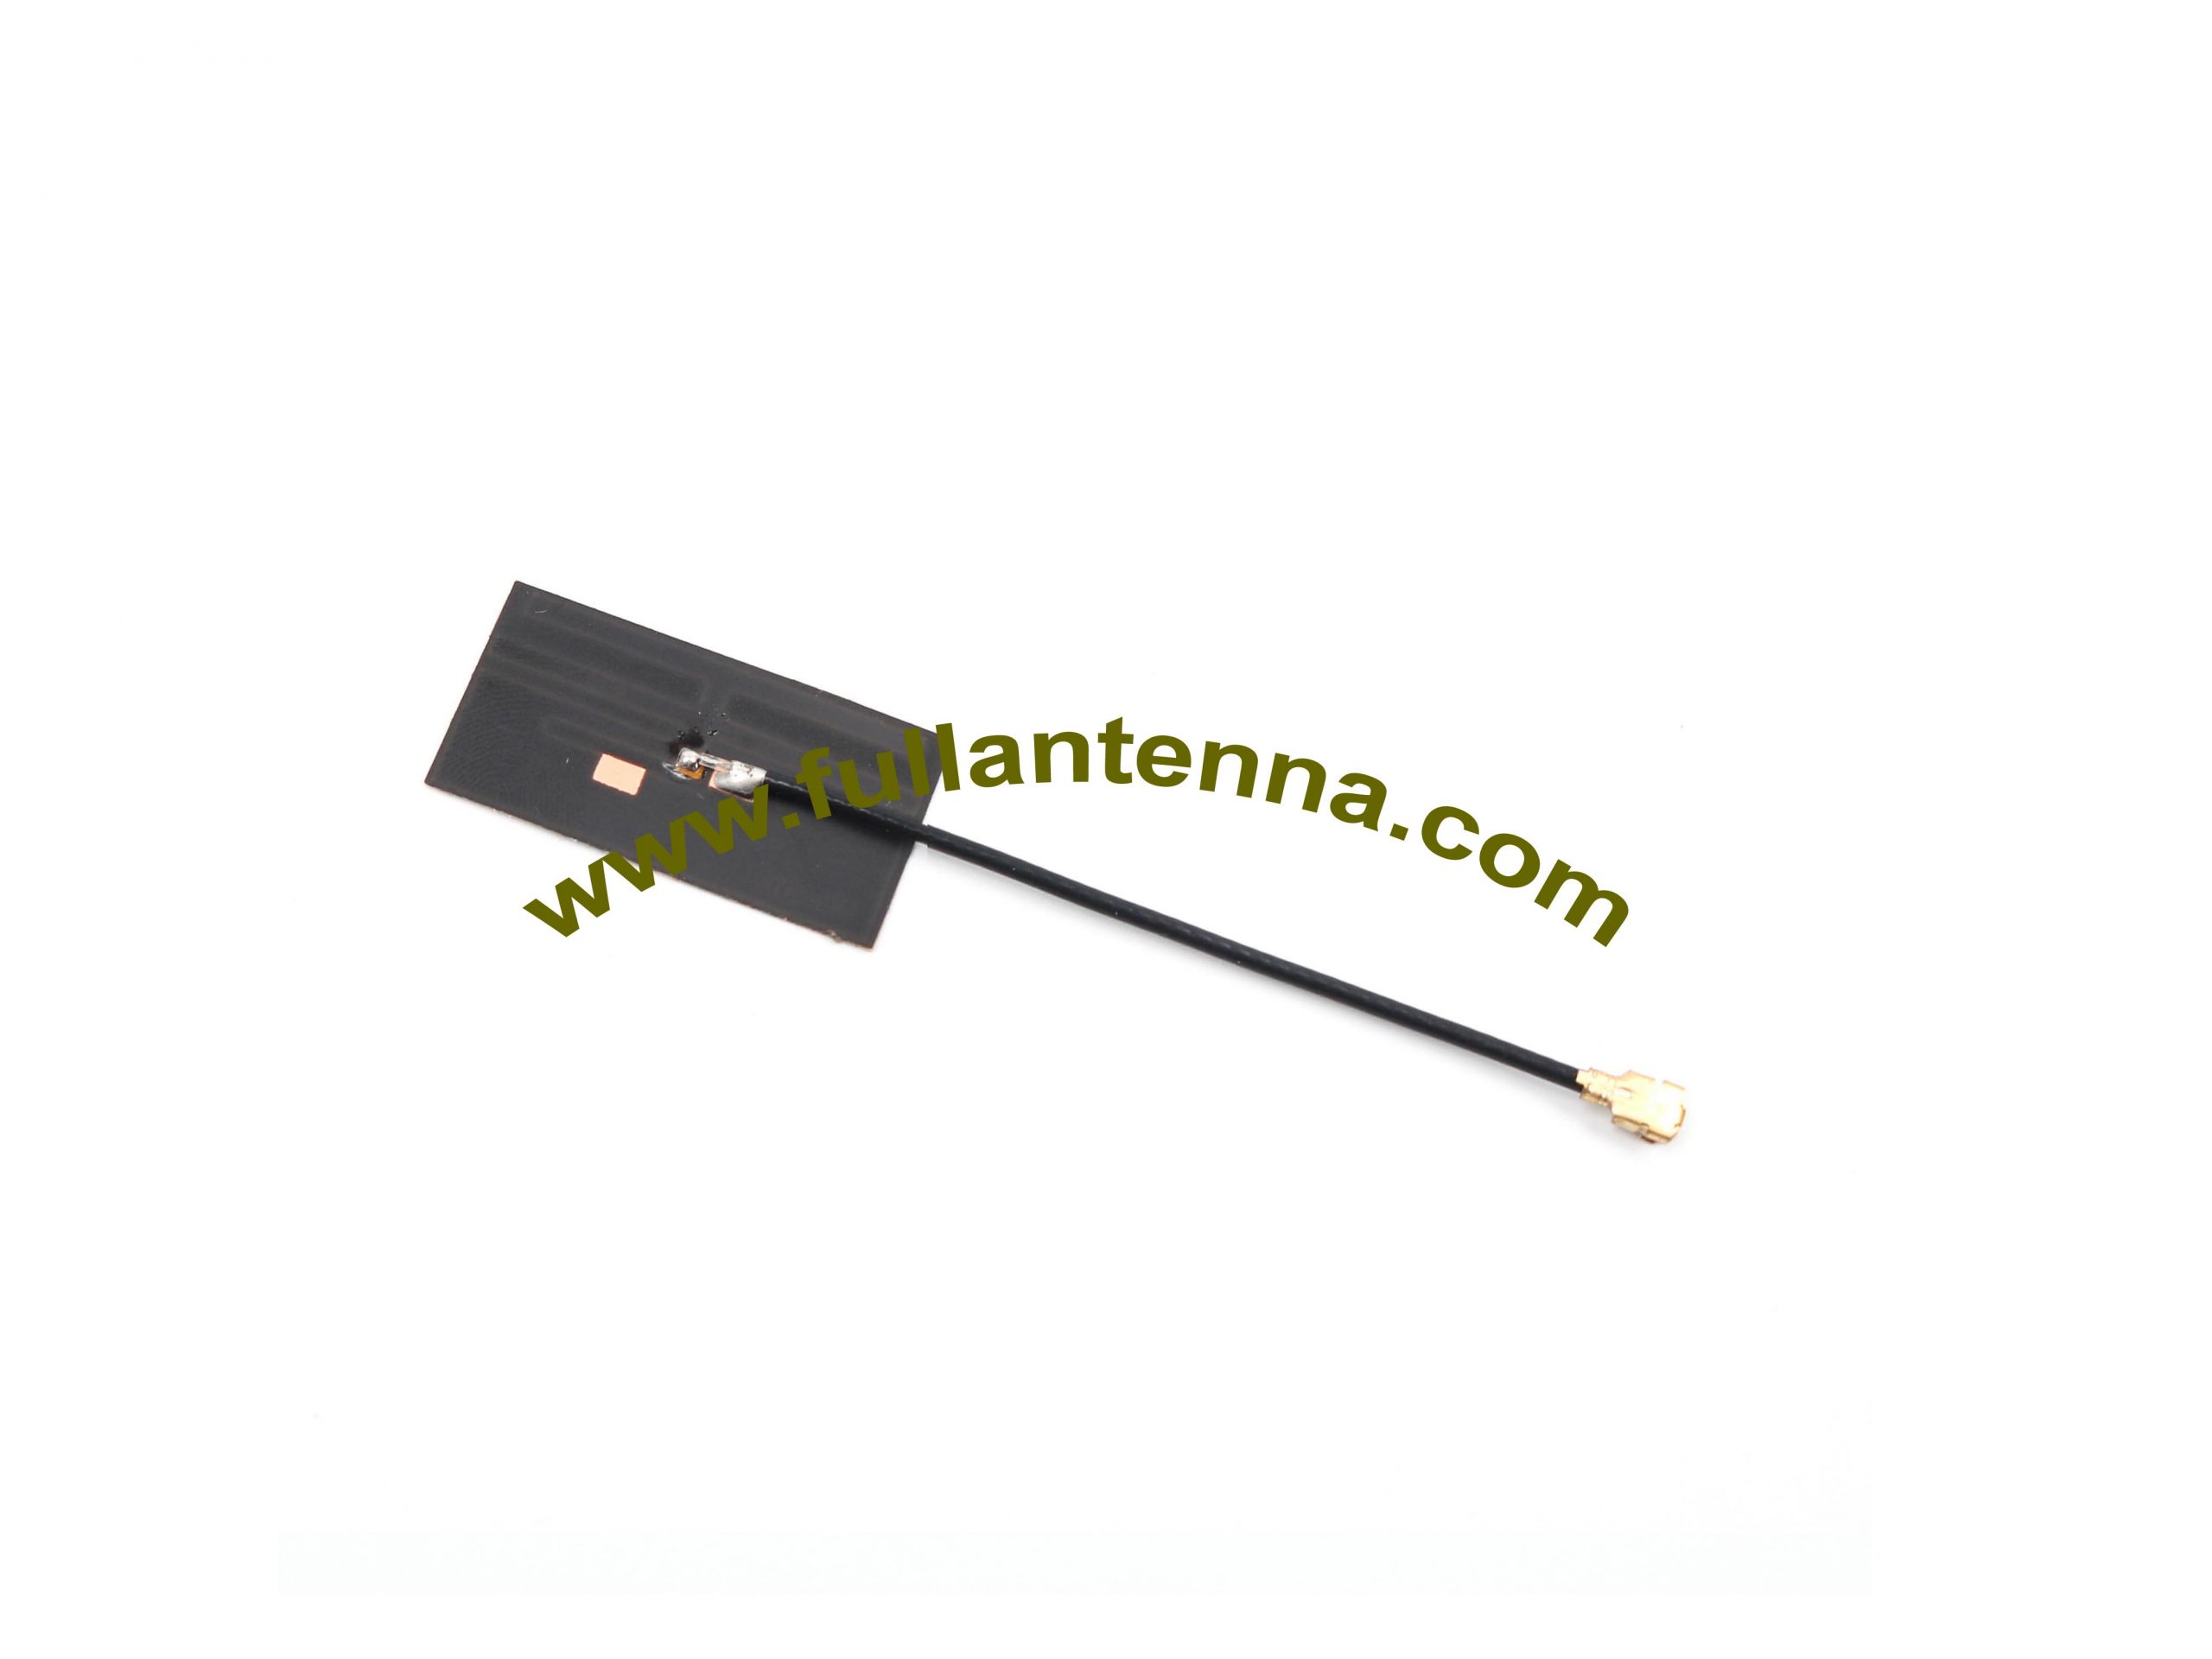 China Factory for Wifi Antenna Booster Outdoor - P/N:FA2400.04FPCB,WiFi/2.4G Built-In Antenna,inner  antenna for  wifi device – Fullantenna